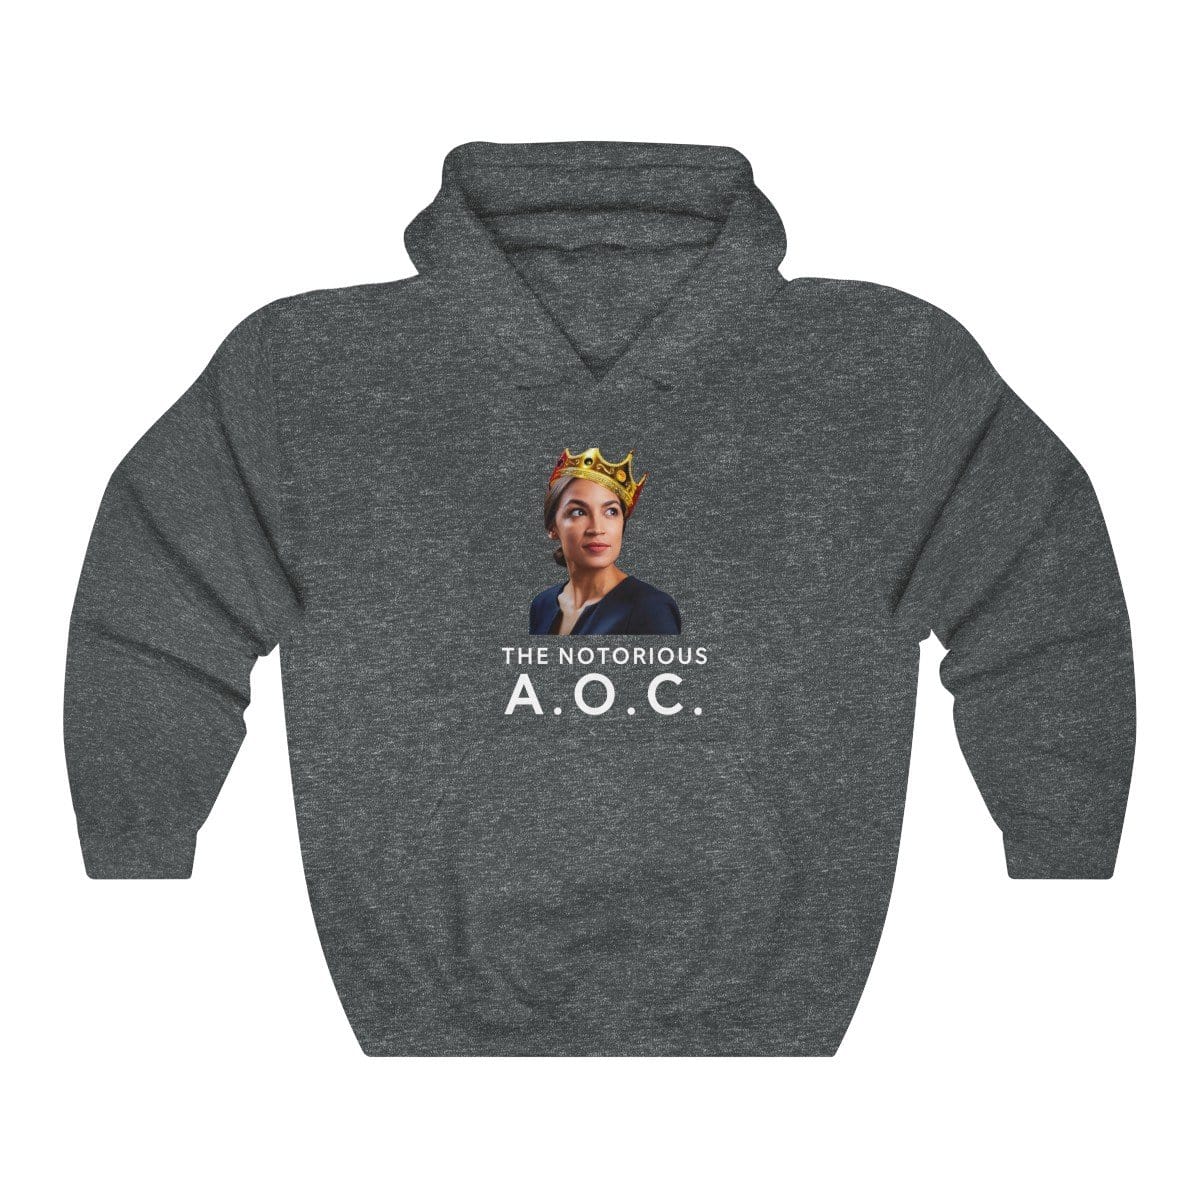 "The Notorious A.O.C." Unisex Hoodie - True Blue Gear